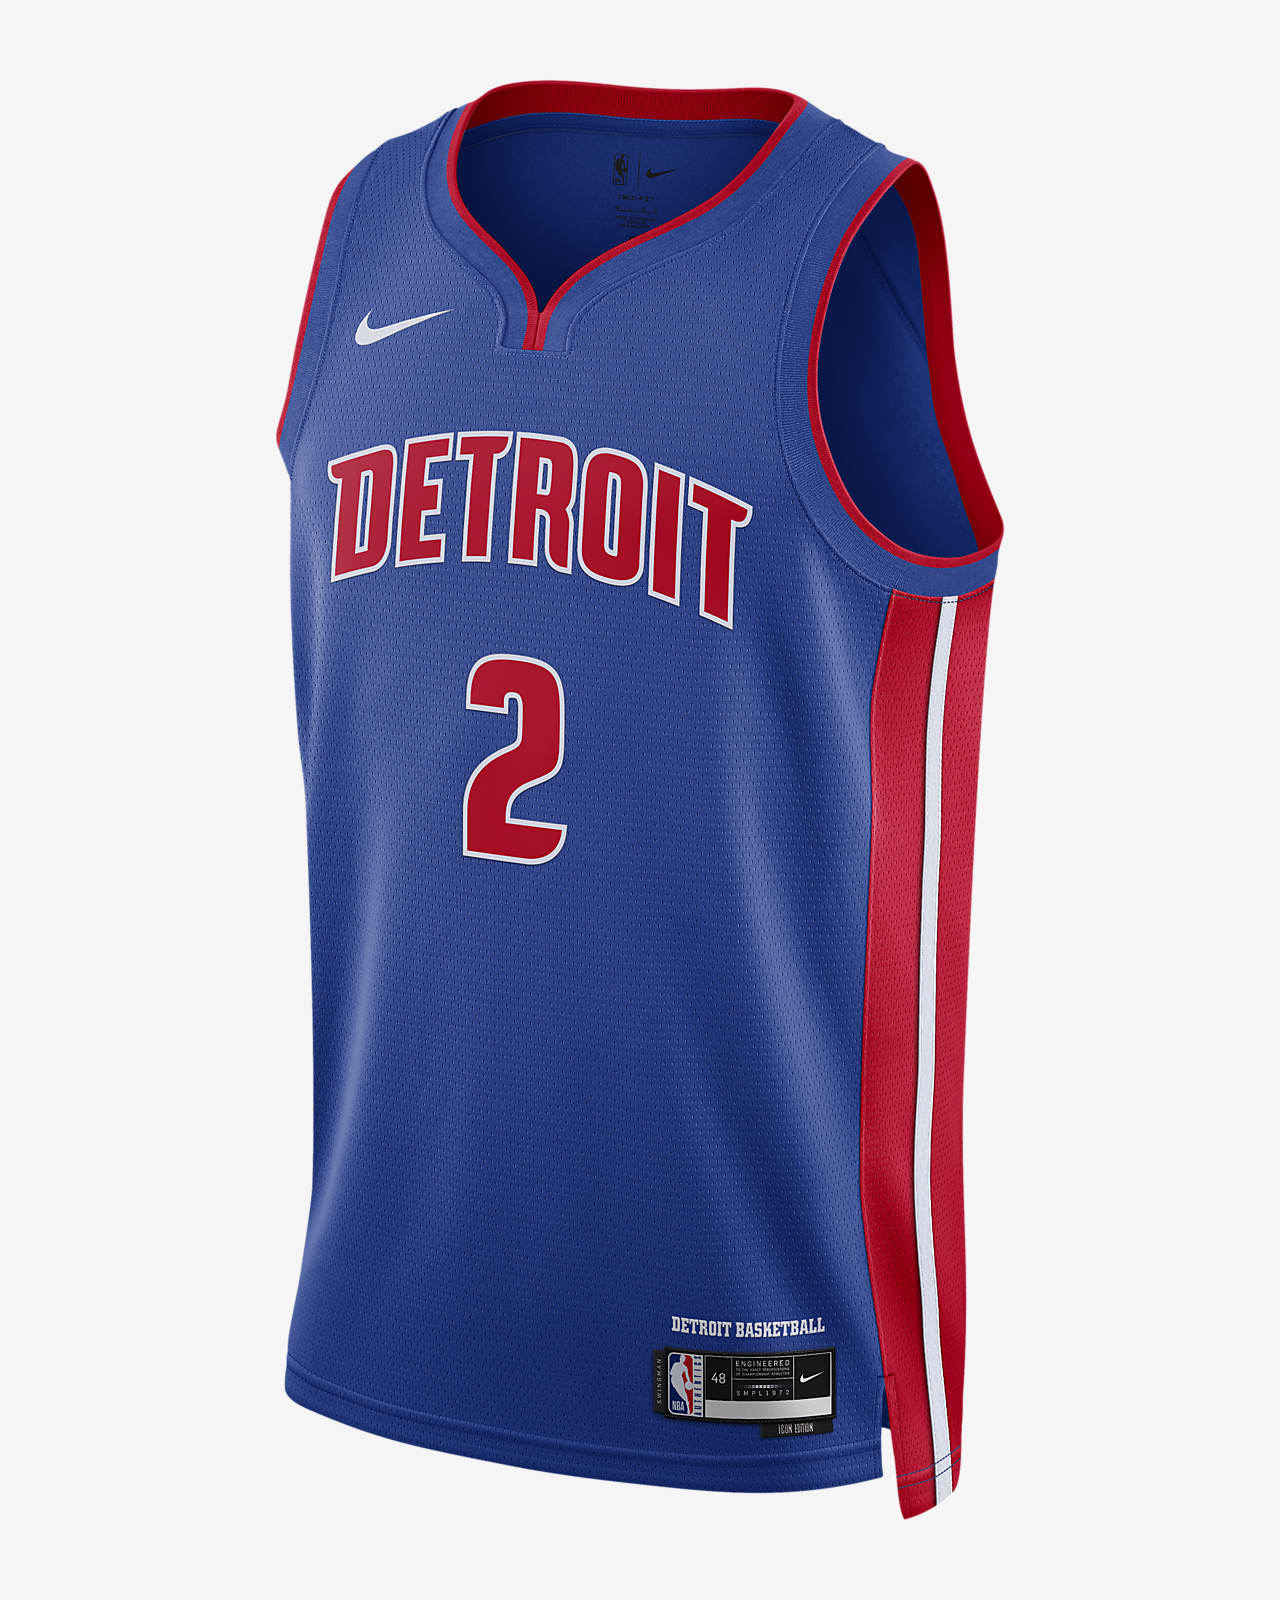 Detroit Pistons - Our official 2022-23 city edition jersey